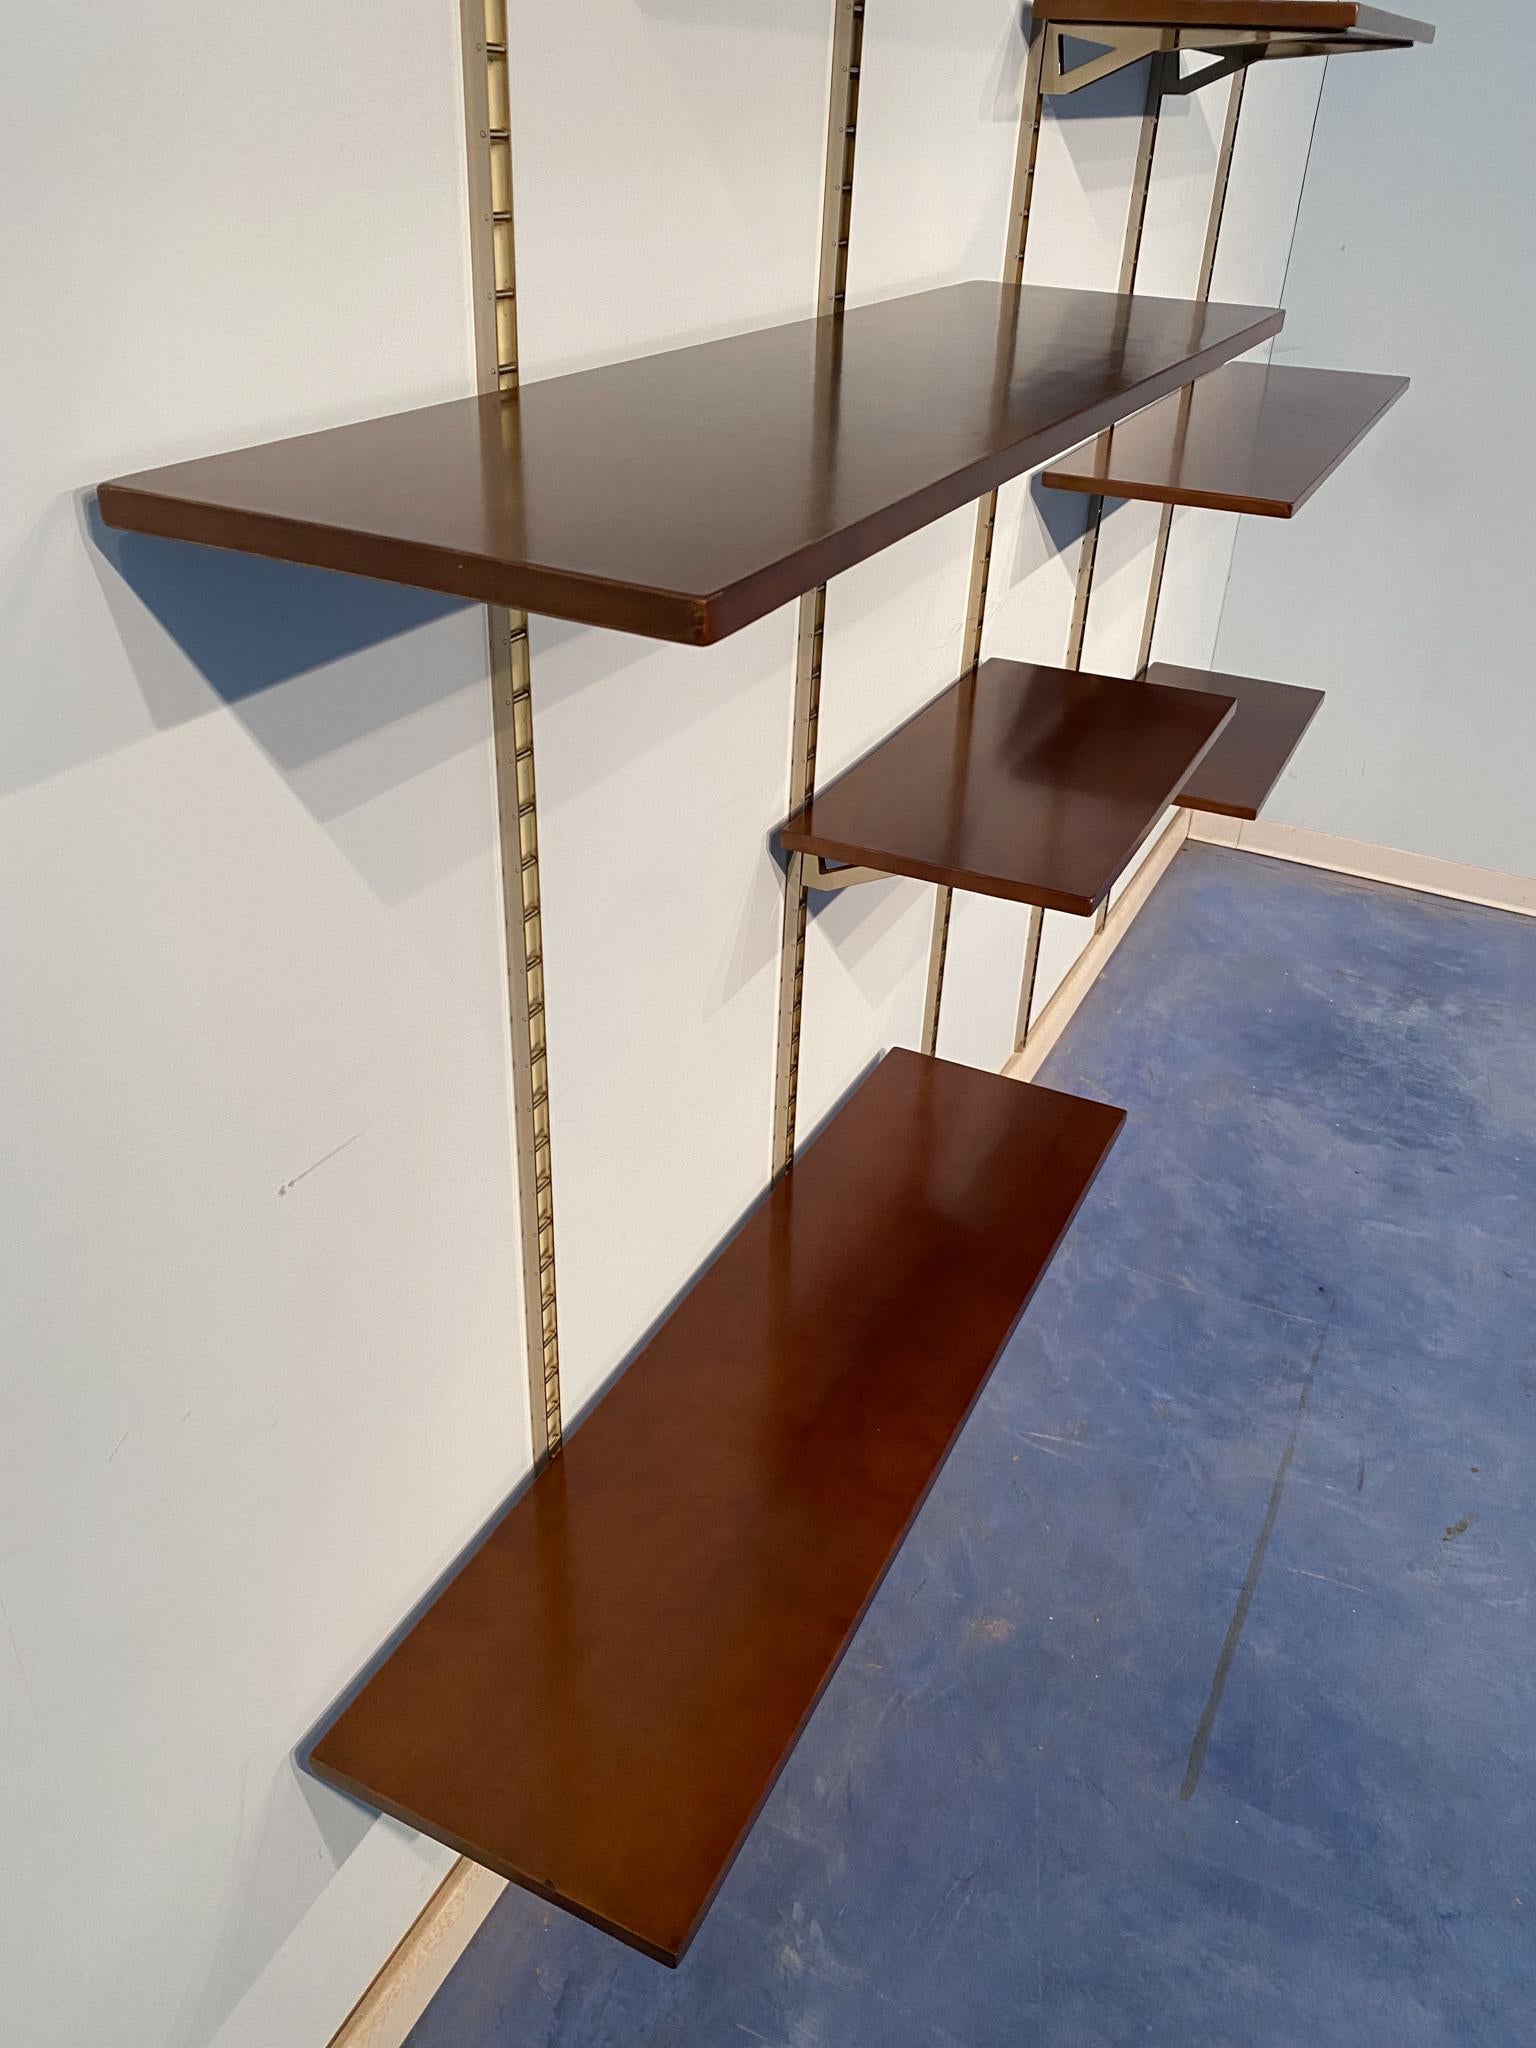 Italian Mid-Century Suspended Wall Unit Boockase in Walnut and Gilded Metal 1960 For Sale 4